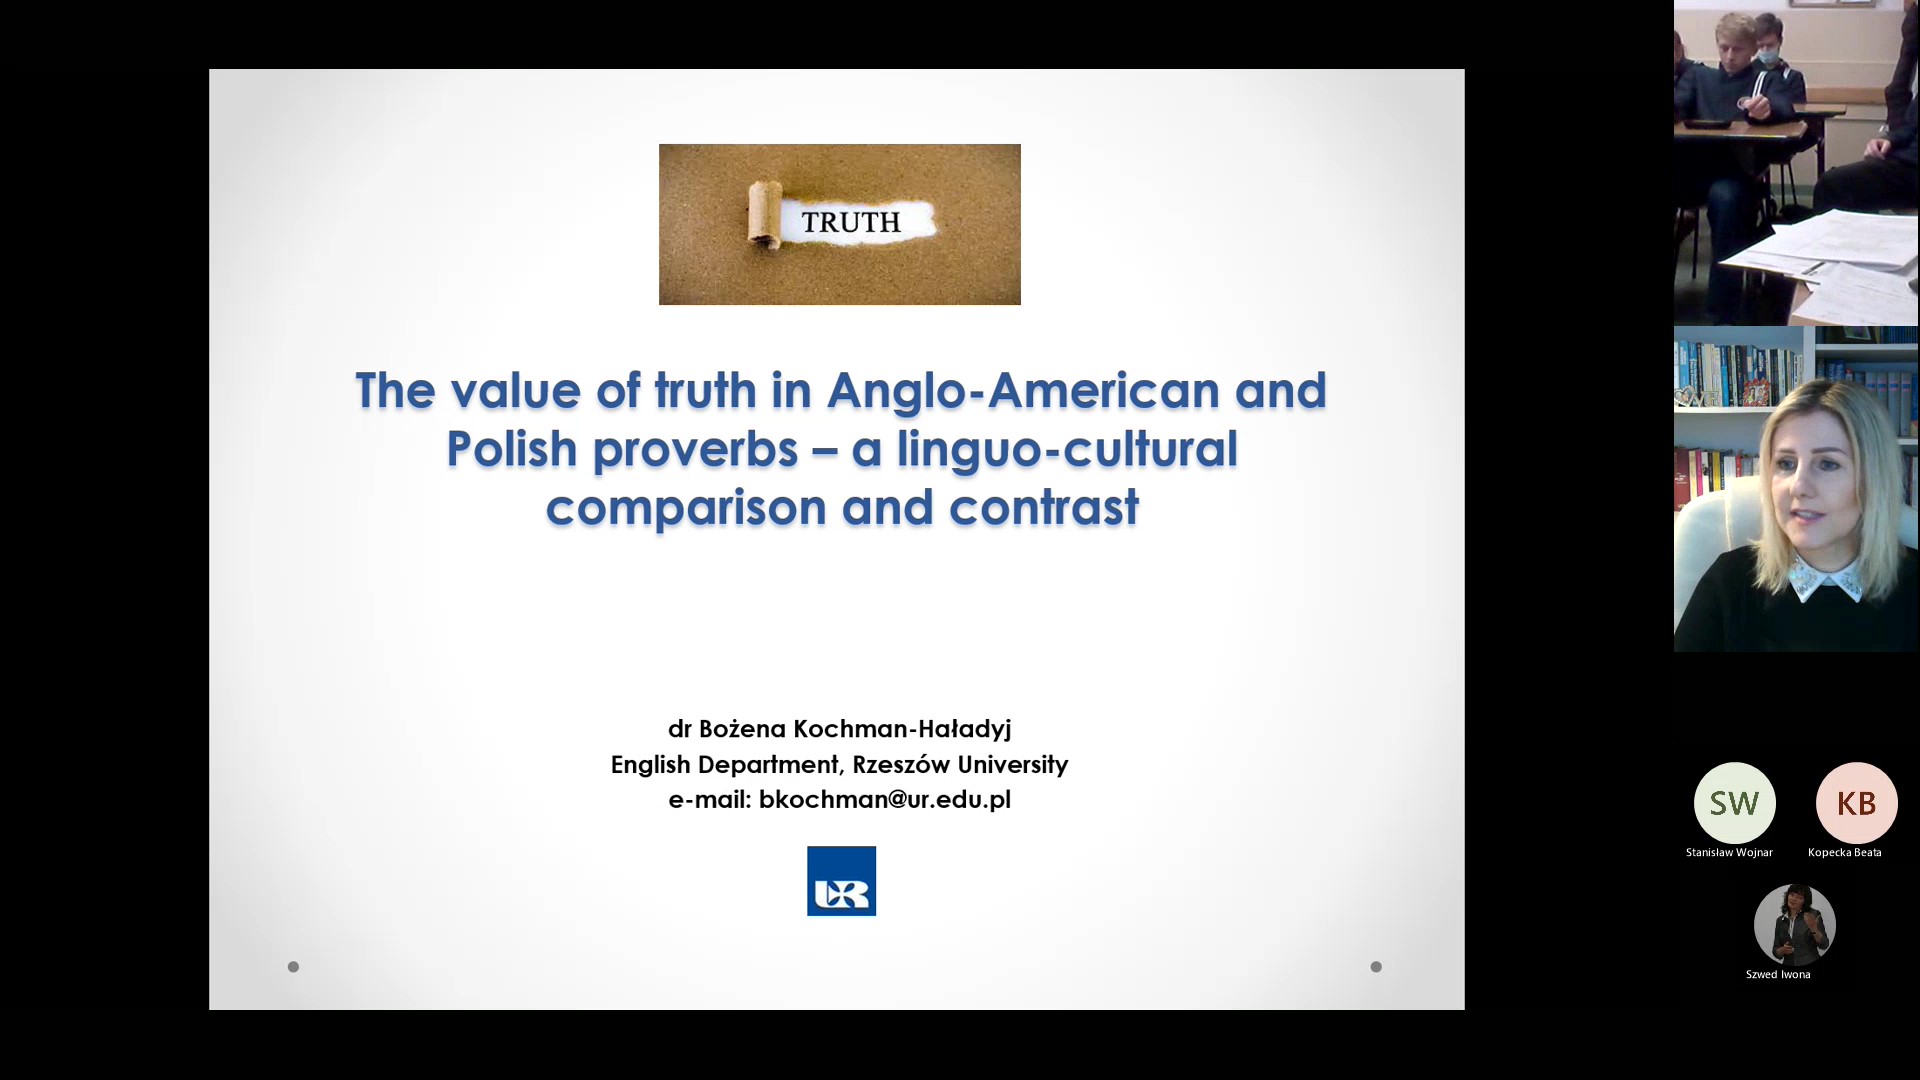 Webinar - the value of truth in Anglo-American and Polish proverbs-20211216_6.jpg [818.17 KB]